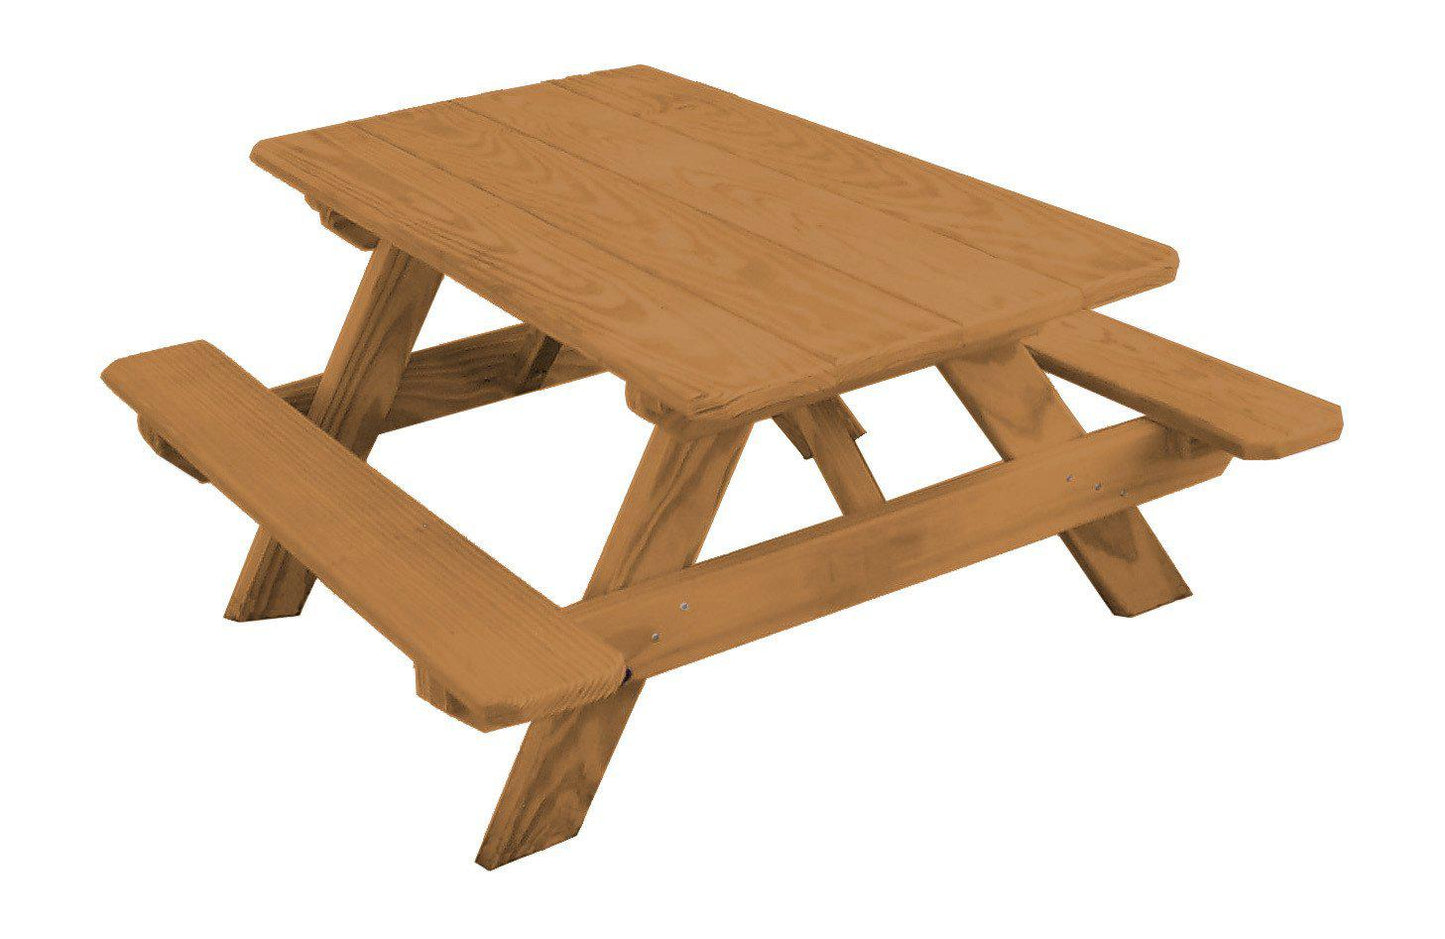 A&L Furniture Co. Pressure Treated Pine 22" Wide Kids Picnic Table - LEAD TIME TO SHIP 10 BUSINESS DAYS